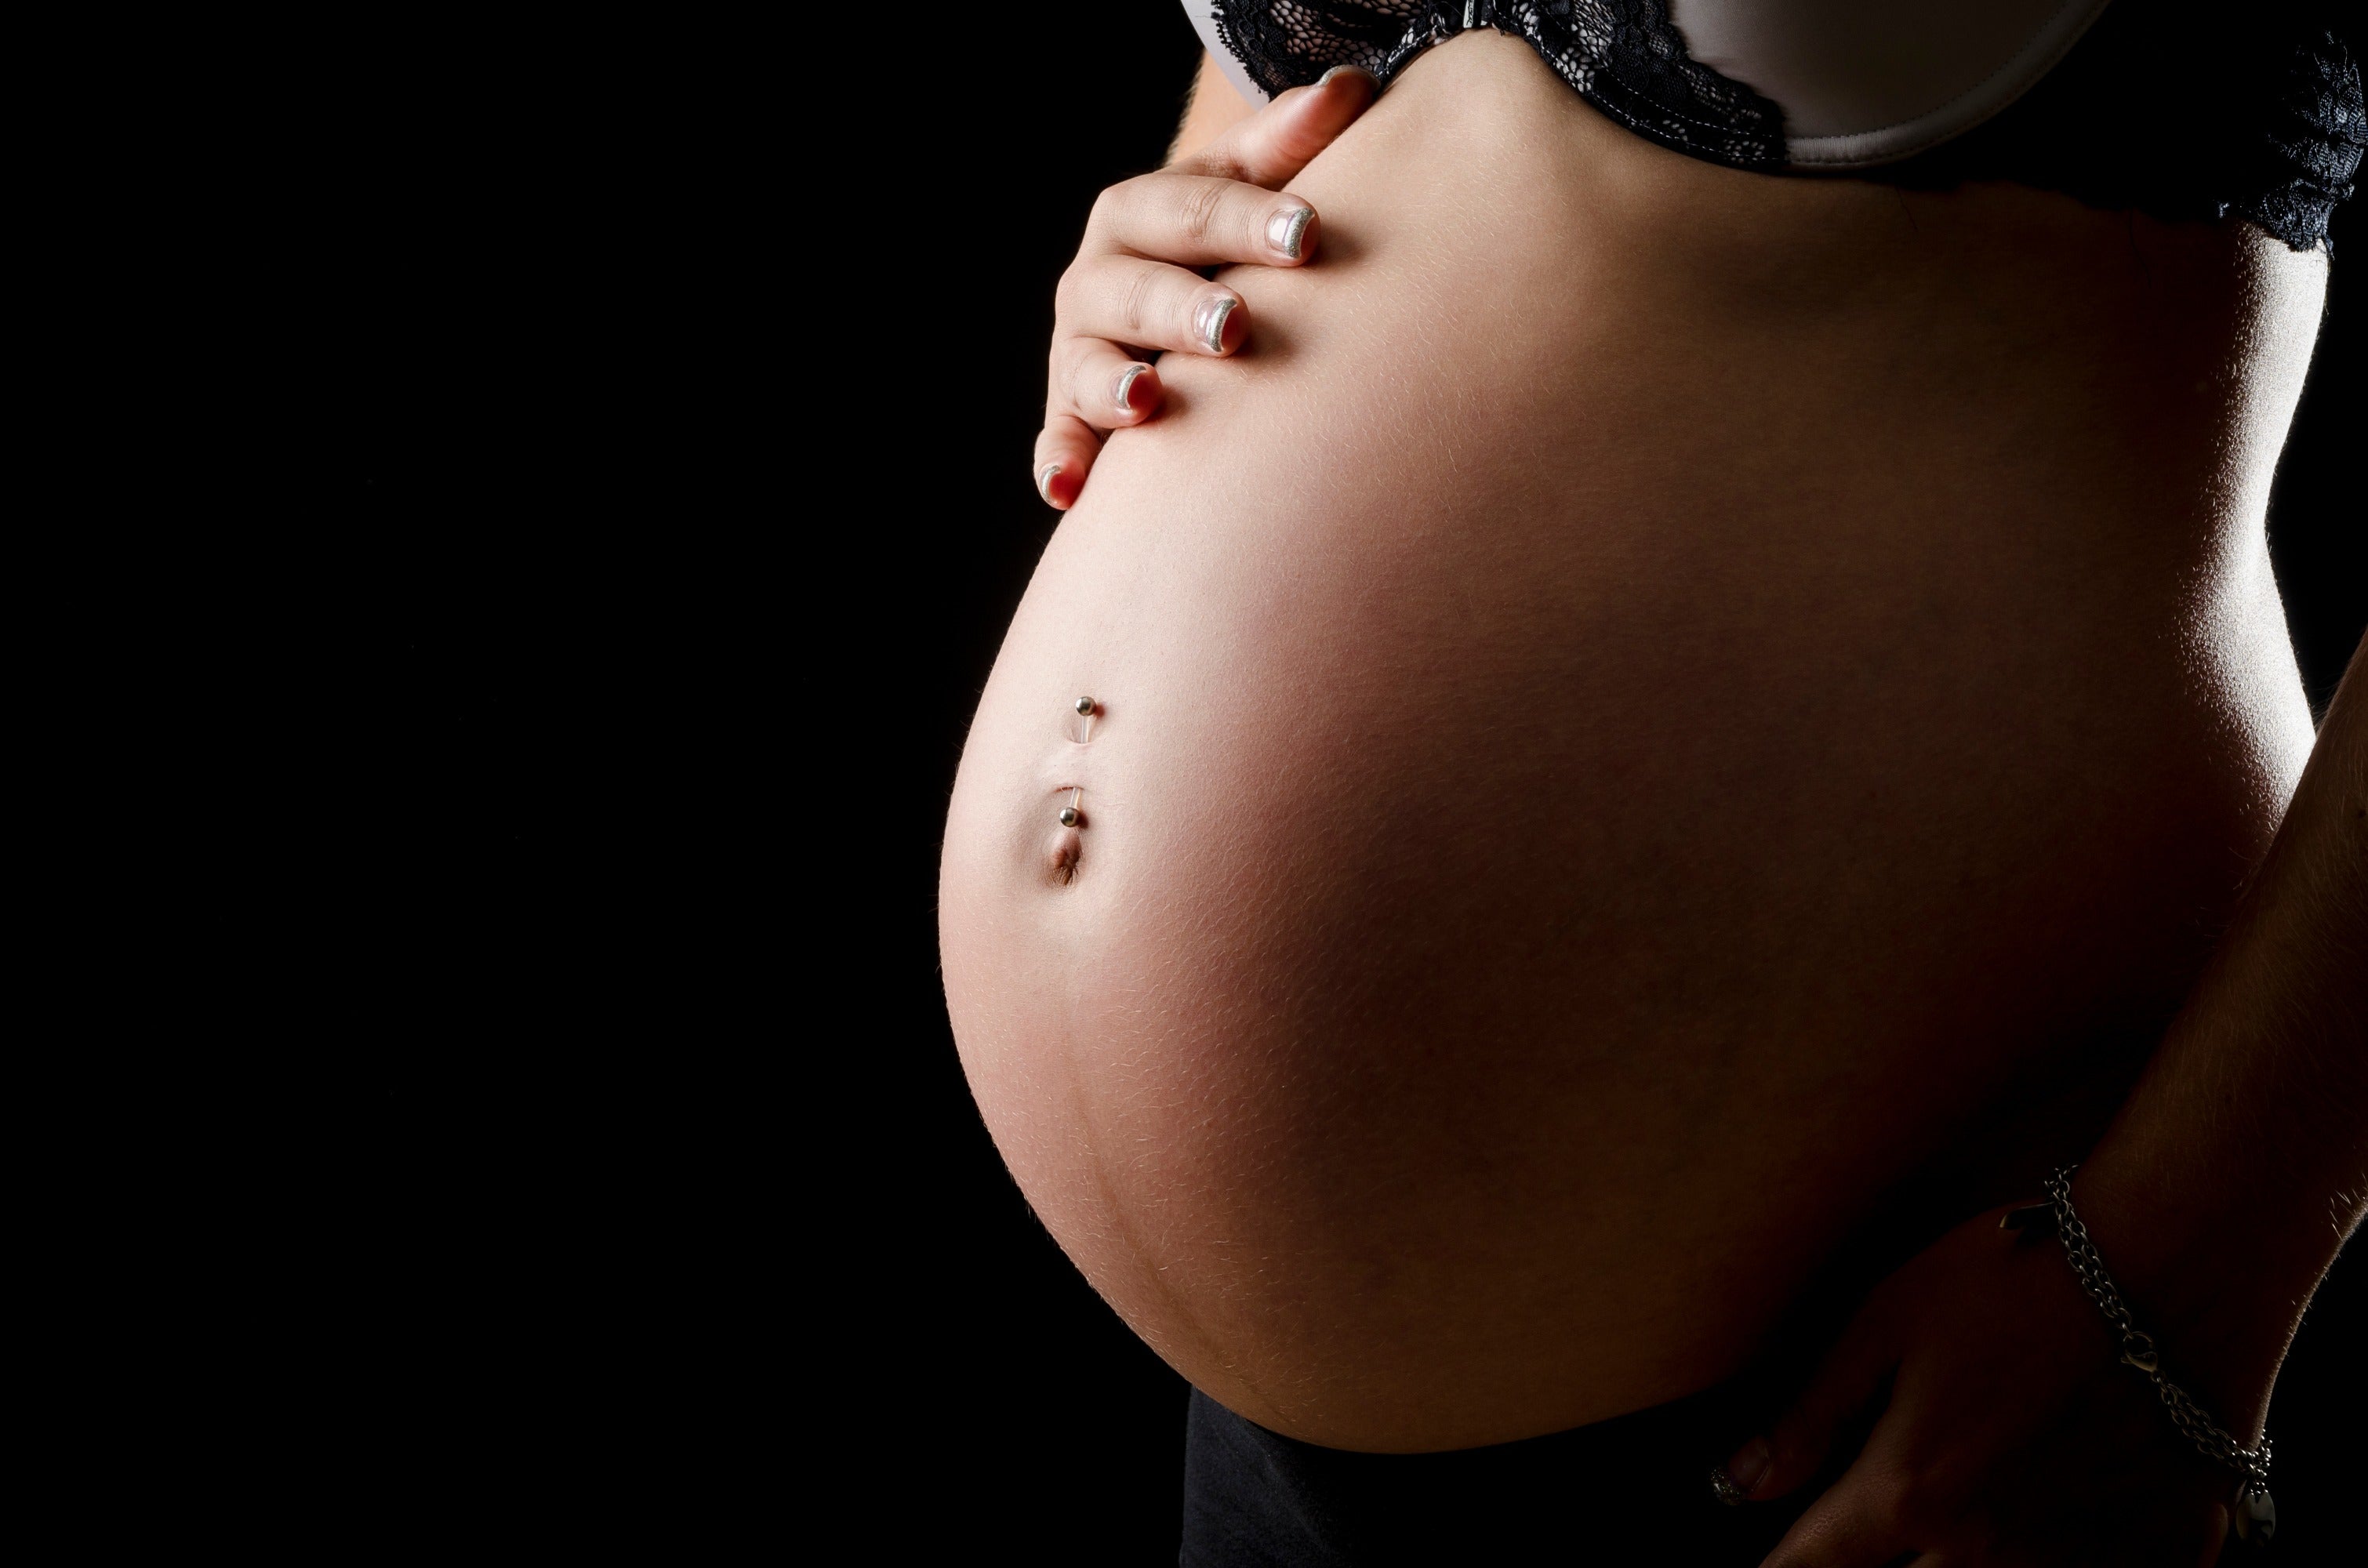 Potential Risks of Body Piercing While Pregnant